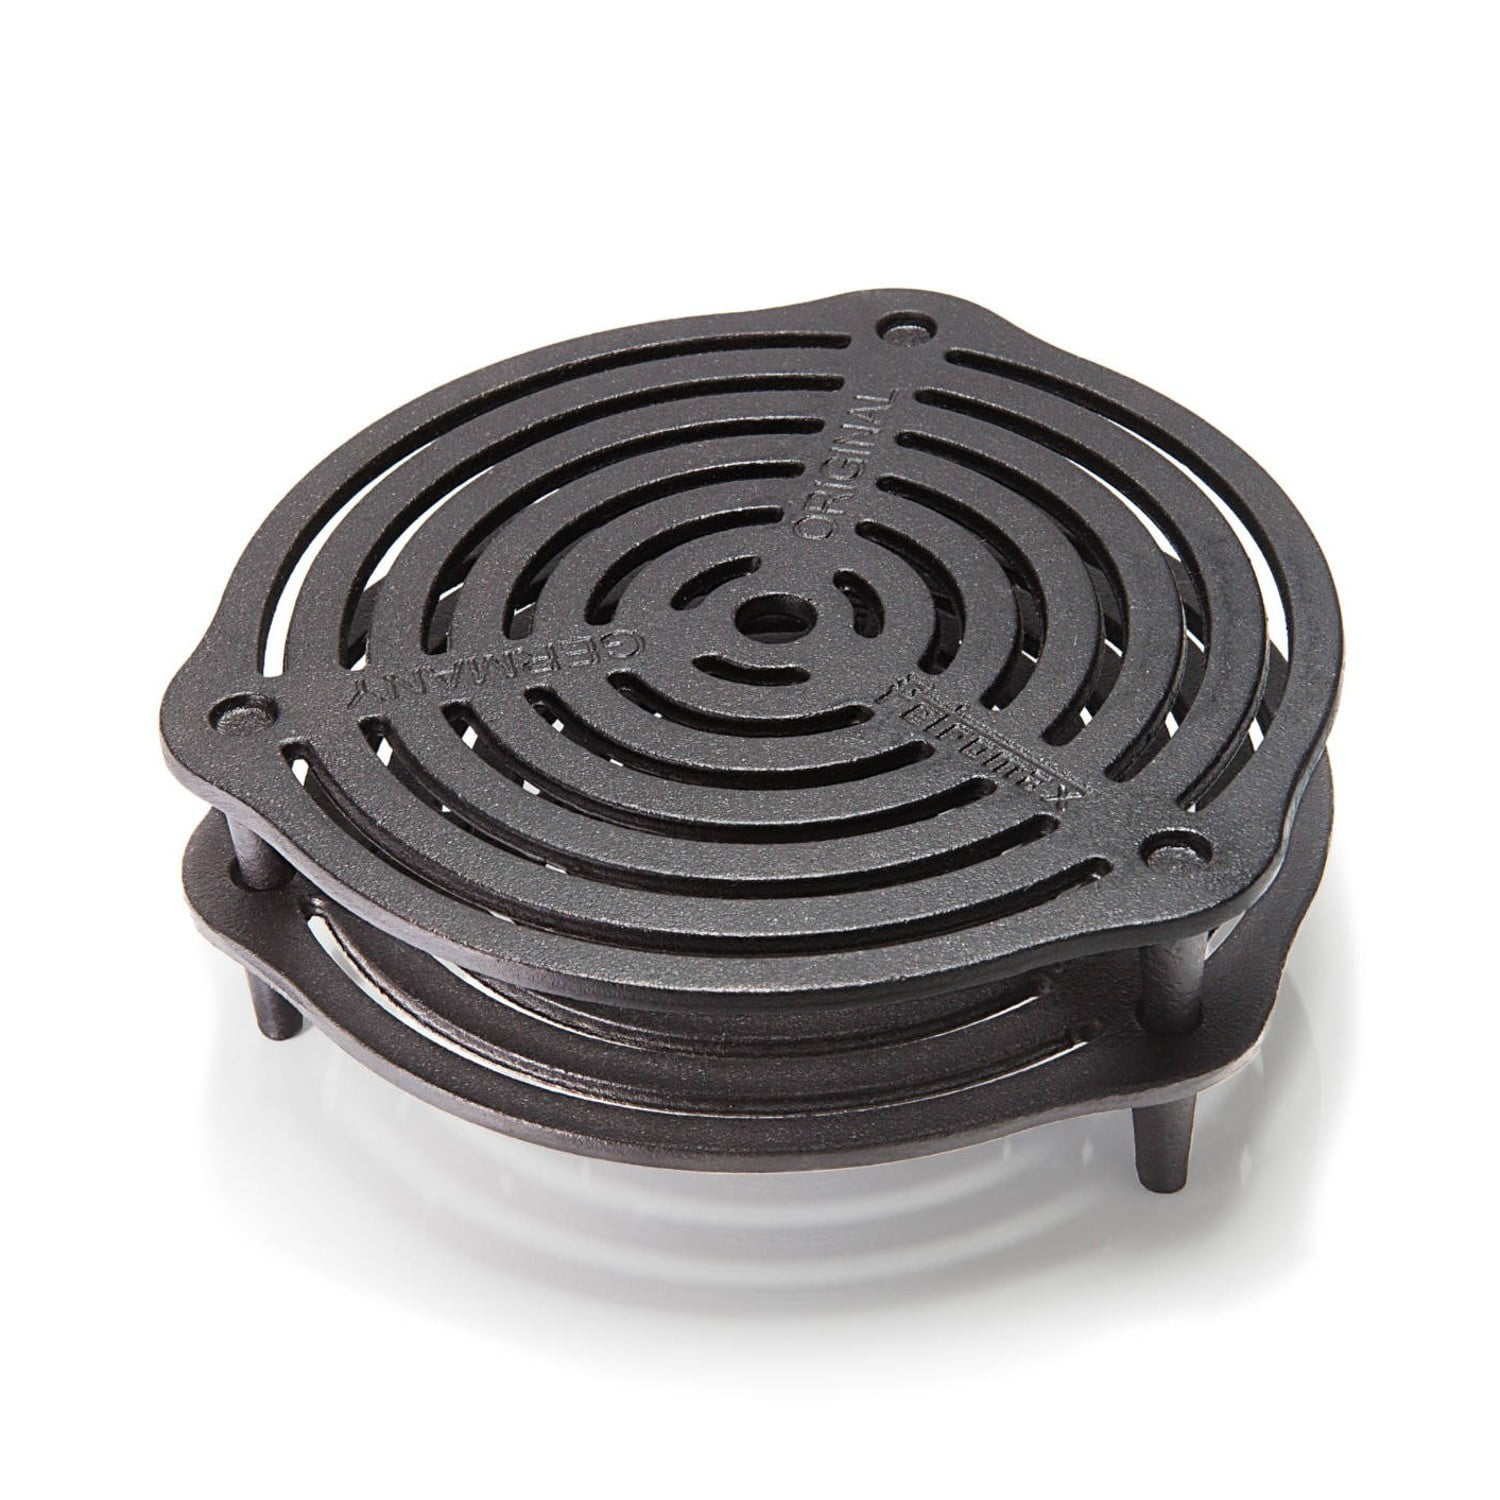 Petromax Cast Iron Trivet, Use in Dutch Ovens to Reduce Burning, Grill Meat  Directly in a Campfire or as a Trivet for Hot Pots in Fire or on Table